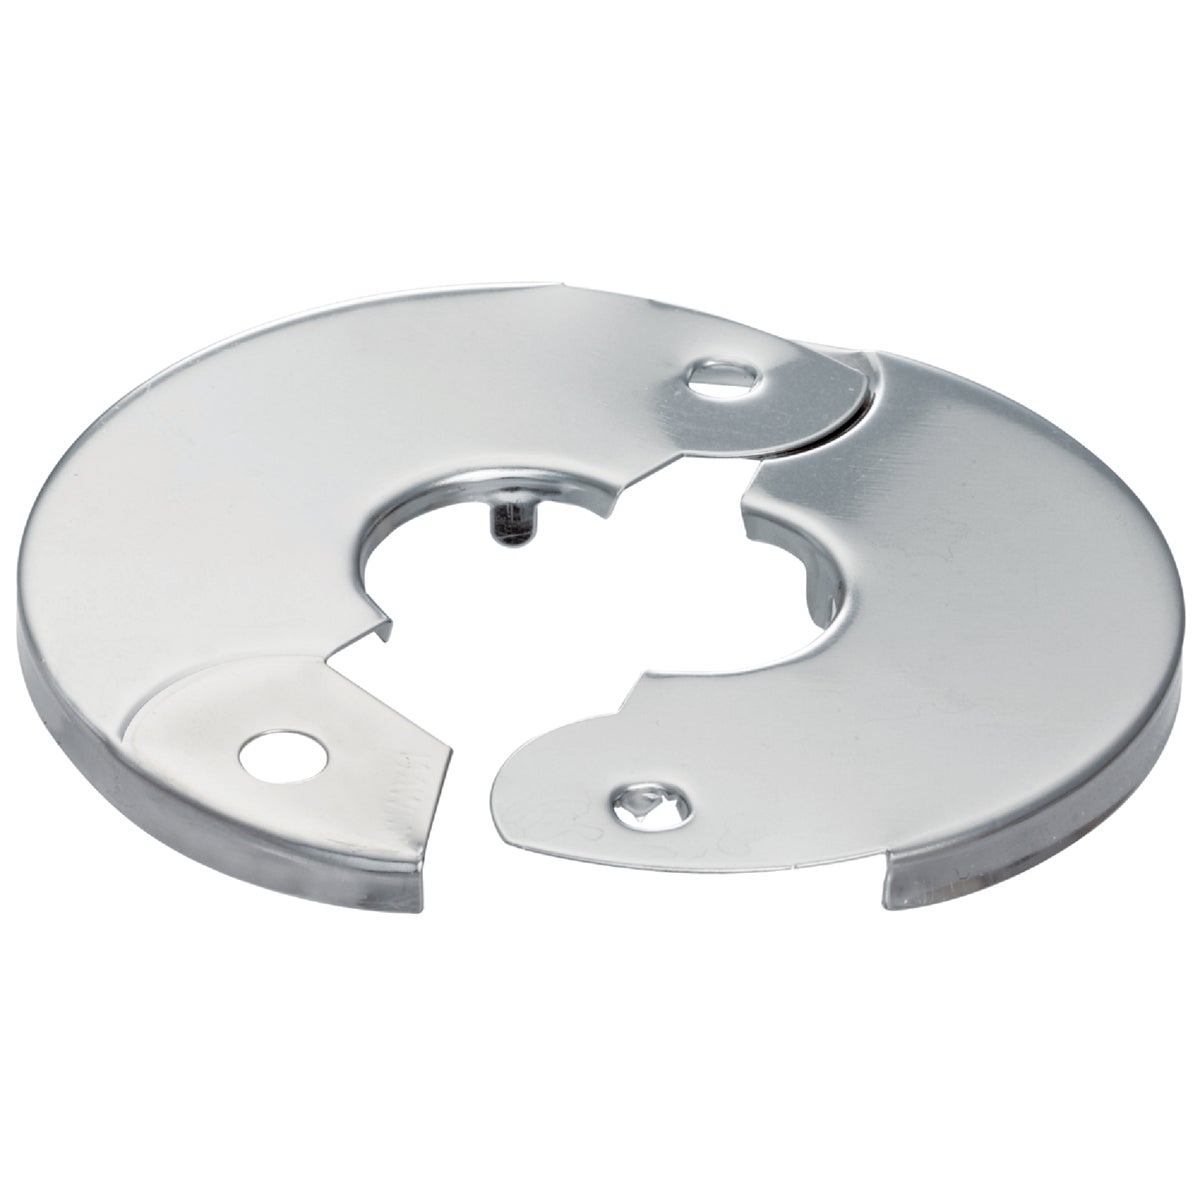 Do it Chrome-Plated 1/2 In. IPS Split Plate